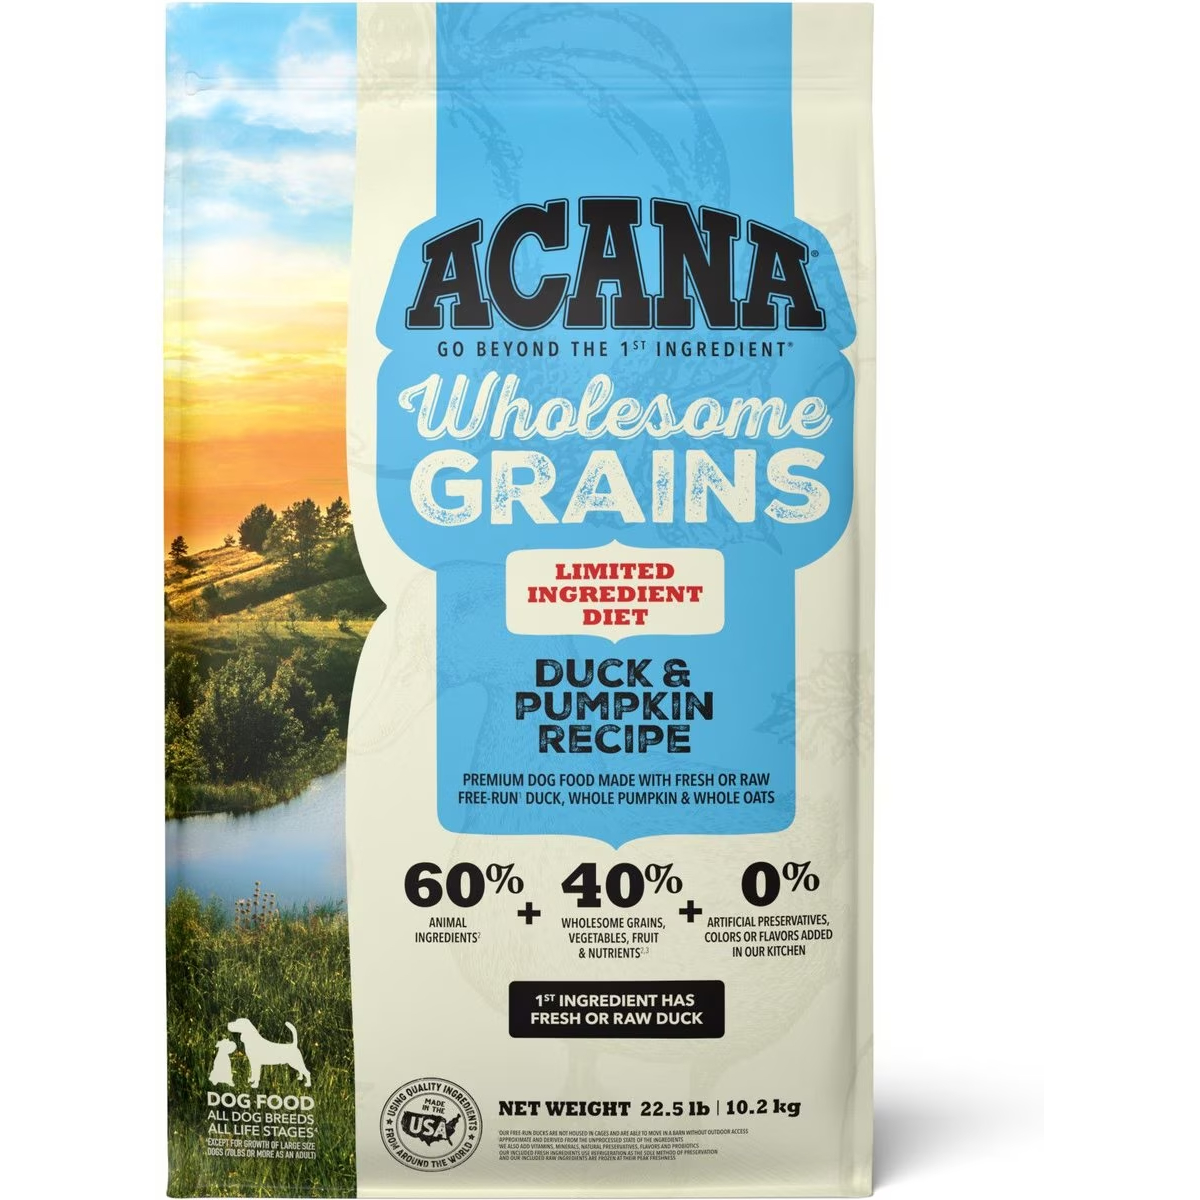 ACANA Singles + Wholesome Grains Limited Ingredient Diet Duck & Pumpkin Recipe Dry Dog Food 